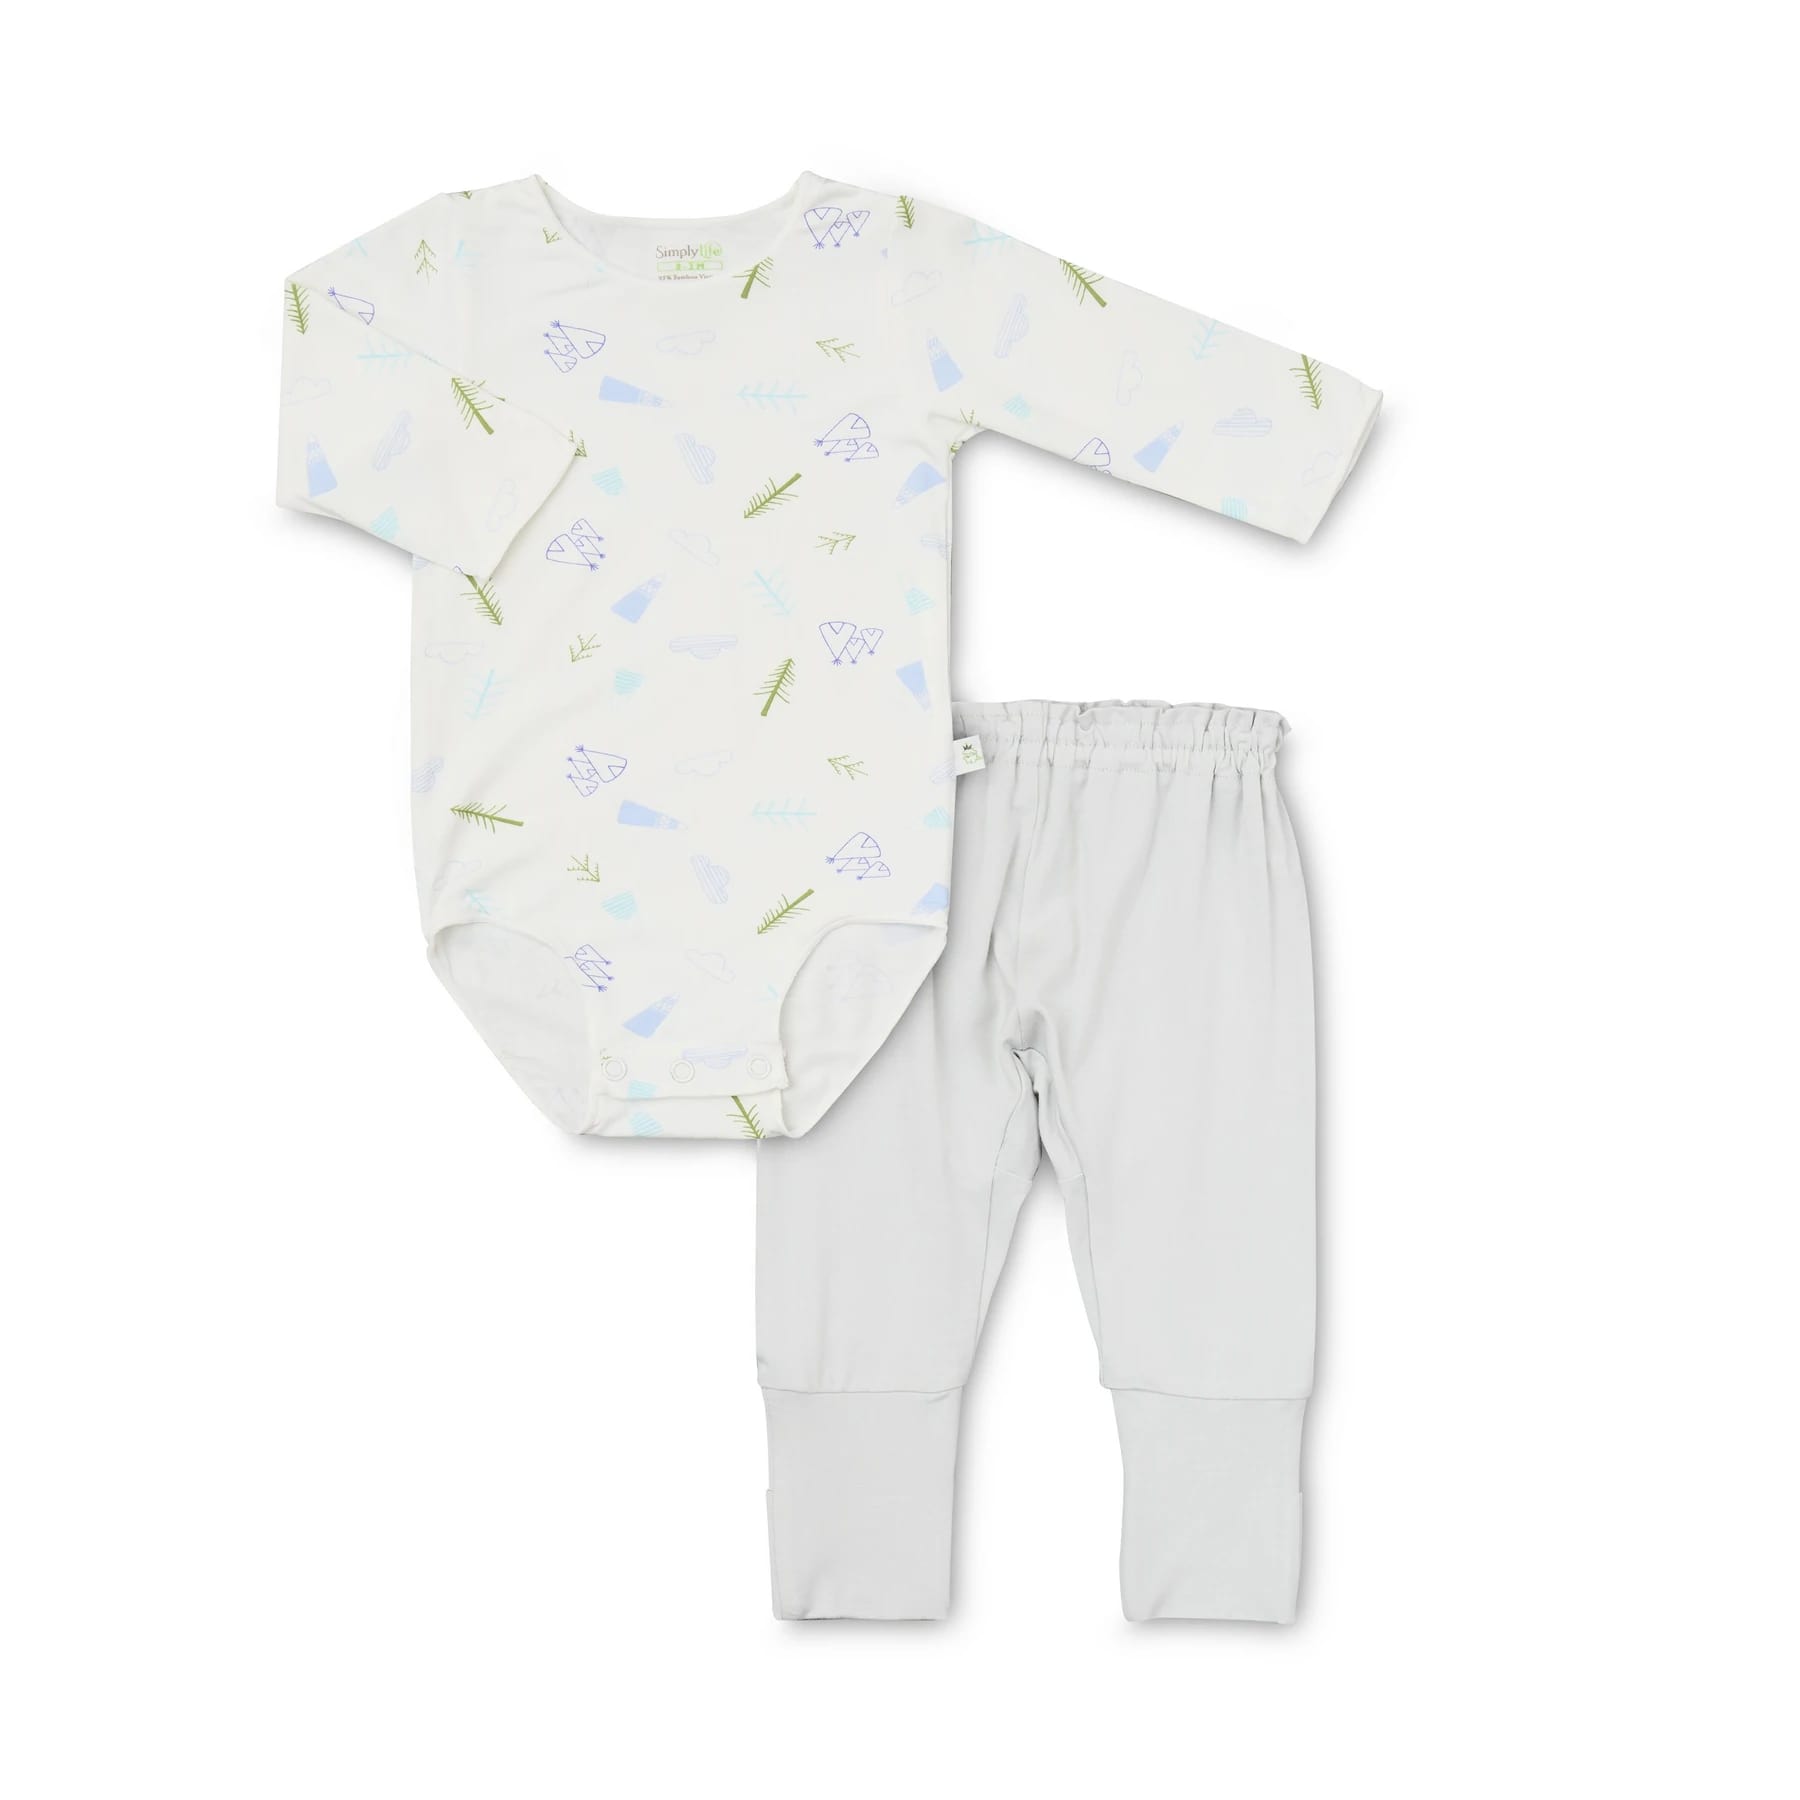 Simply Life Bamboo Stretchy LS Romper with Long pants folded footies - Mountains (SLWR-2143MT)